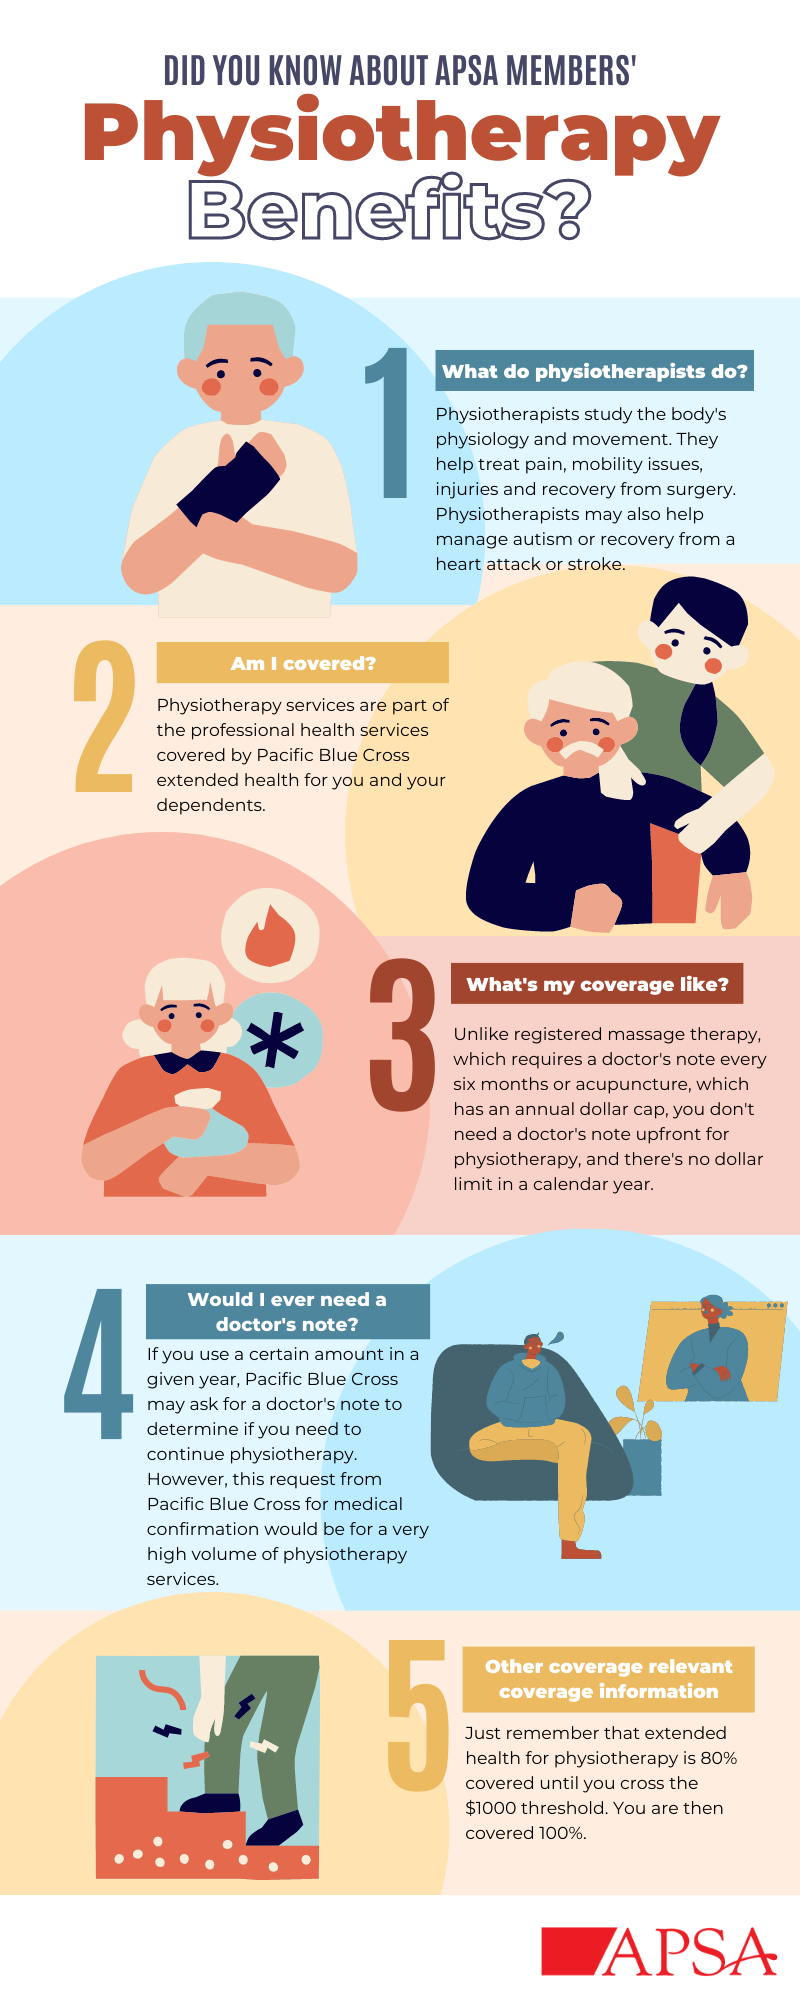 Did You Know about your unlimited Physiotherapy benefits?